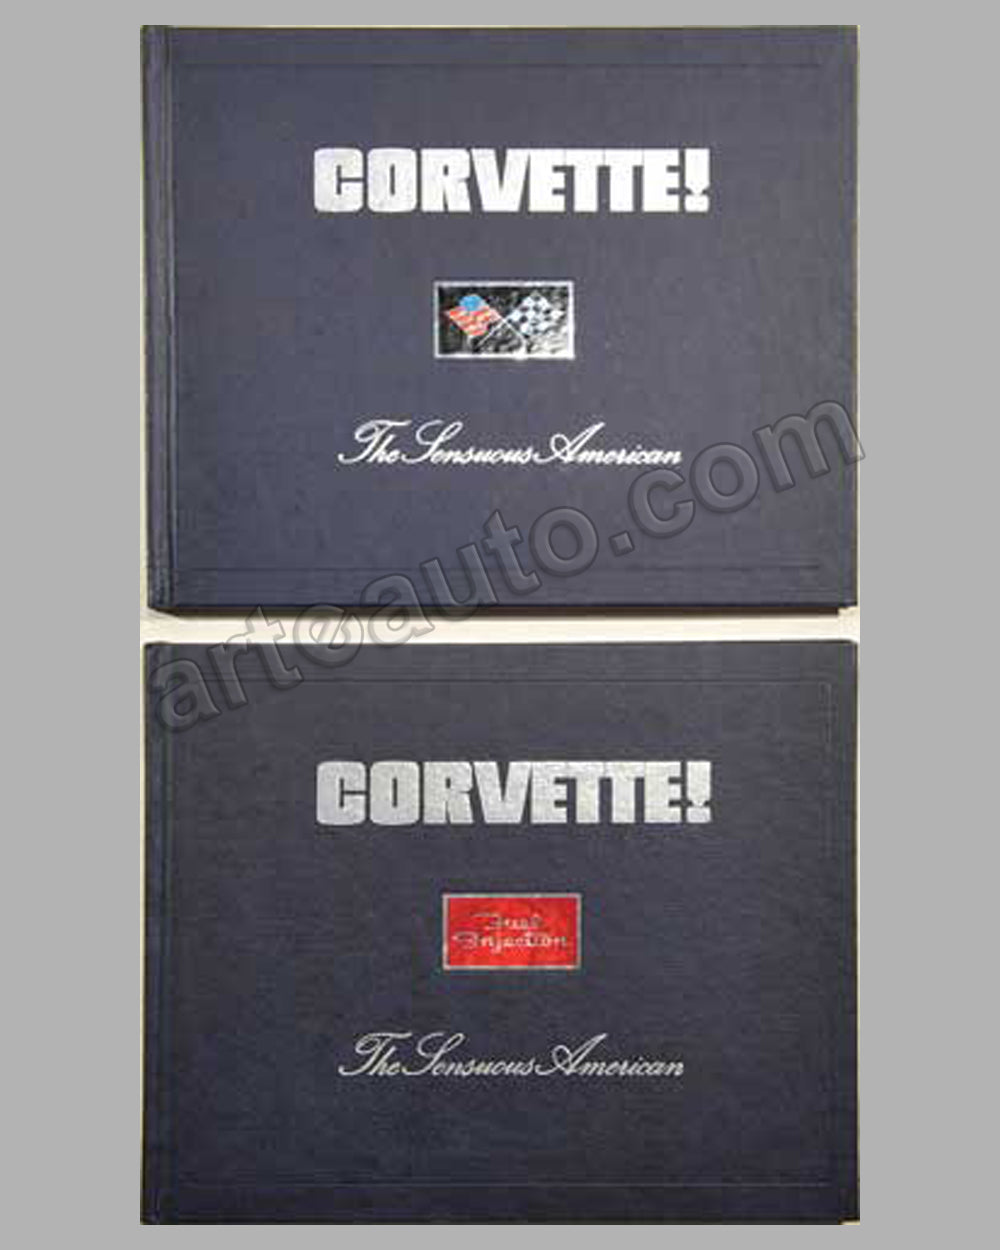 Two volumes Corvette - The Sensuous American by M. Antonick